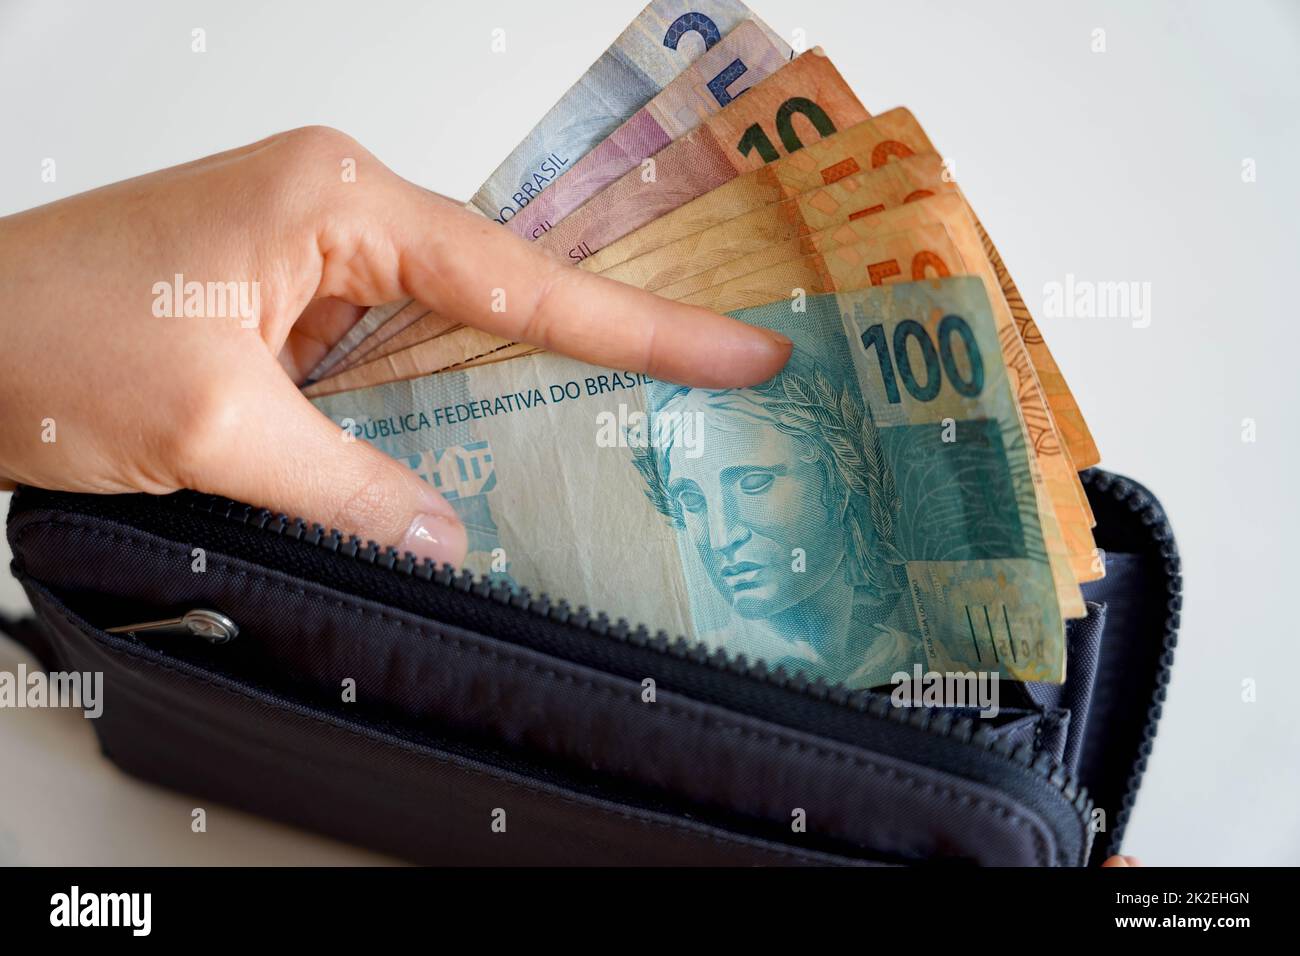 Rising prices. Hand taking Brazilian Real banknotes from wallet. Recession. Financial crisis. Stock Photo